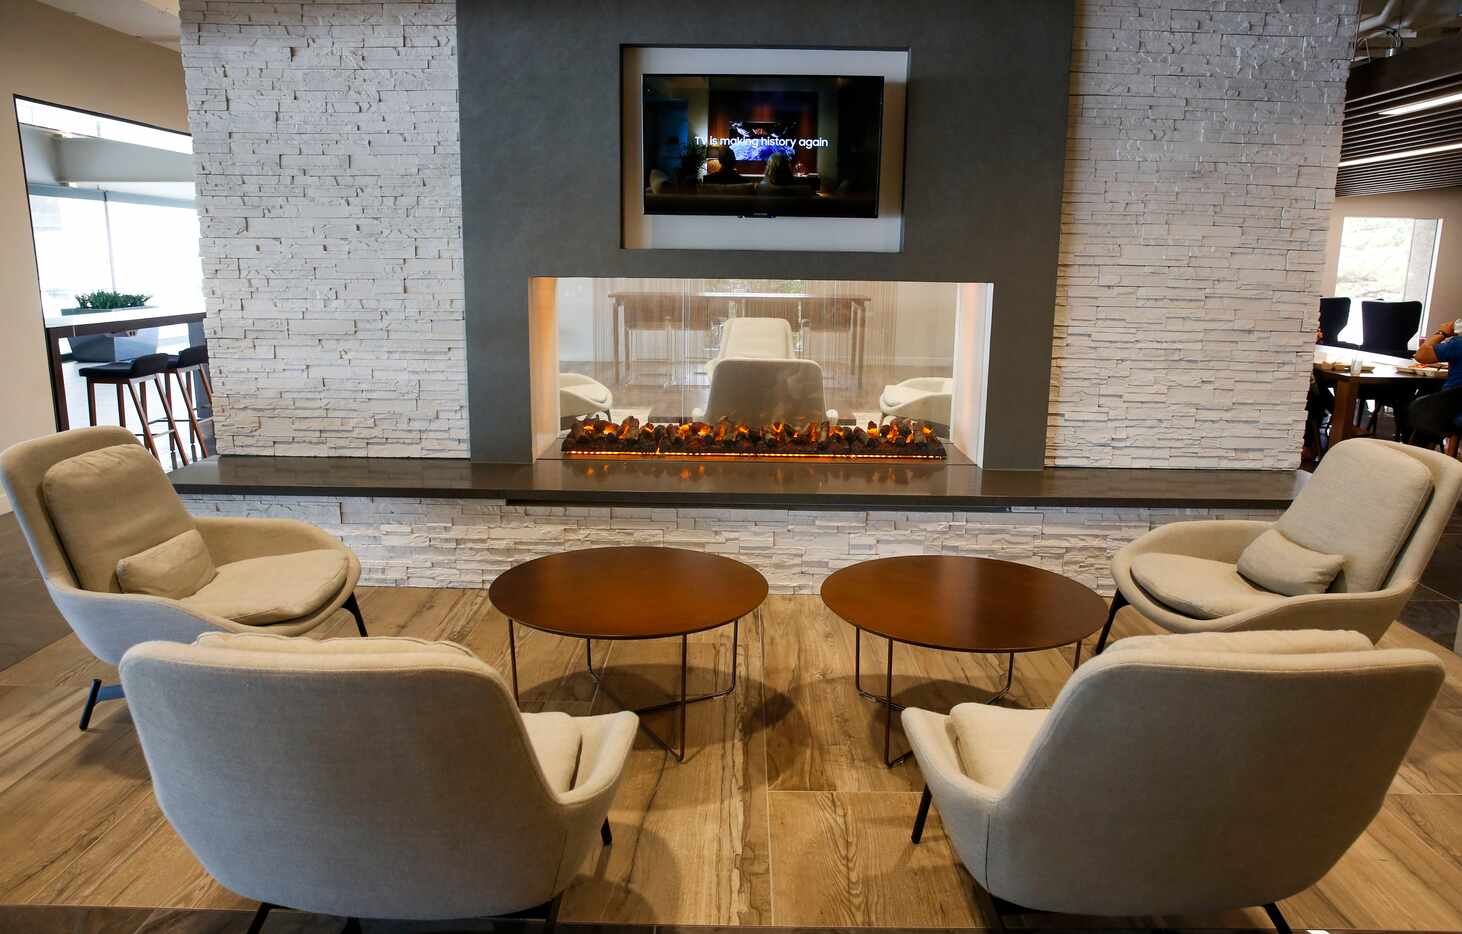 A lounge area in front of a fireplace in the tenant lounge in The Towers at Williams Square.